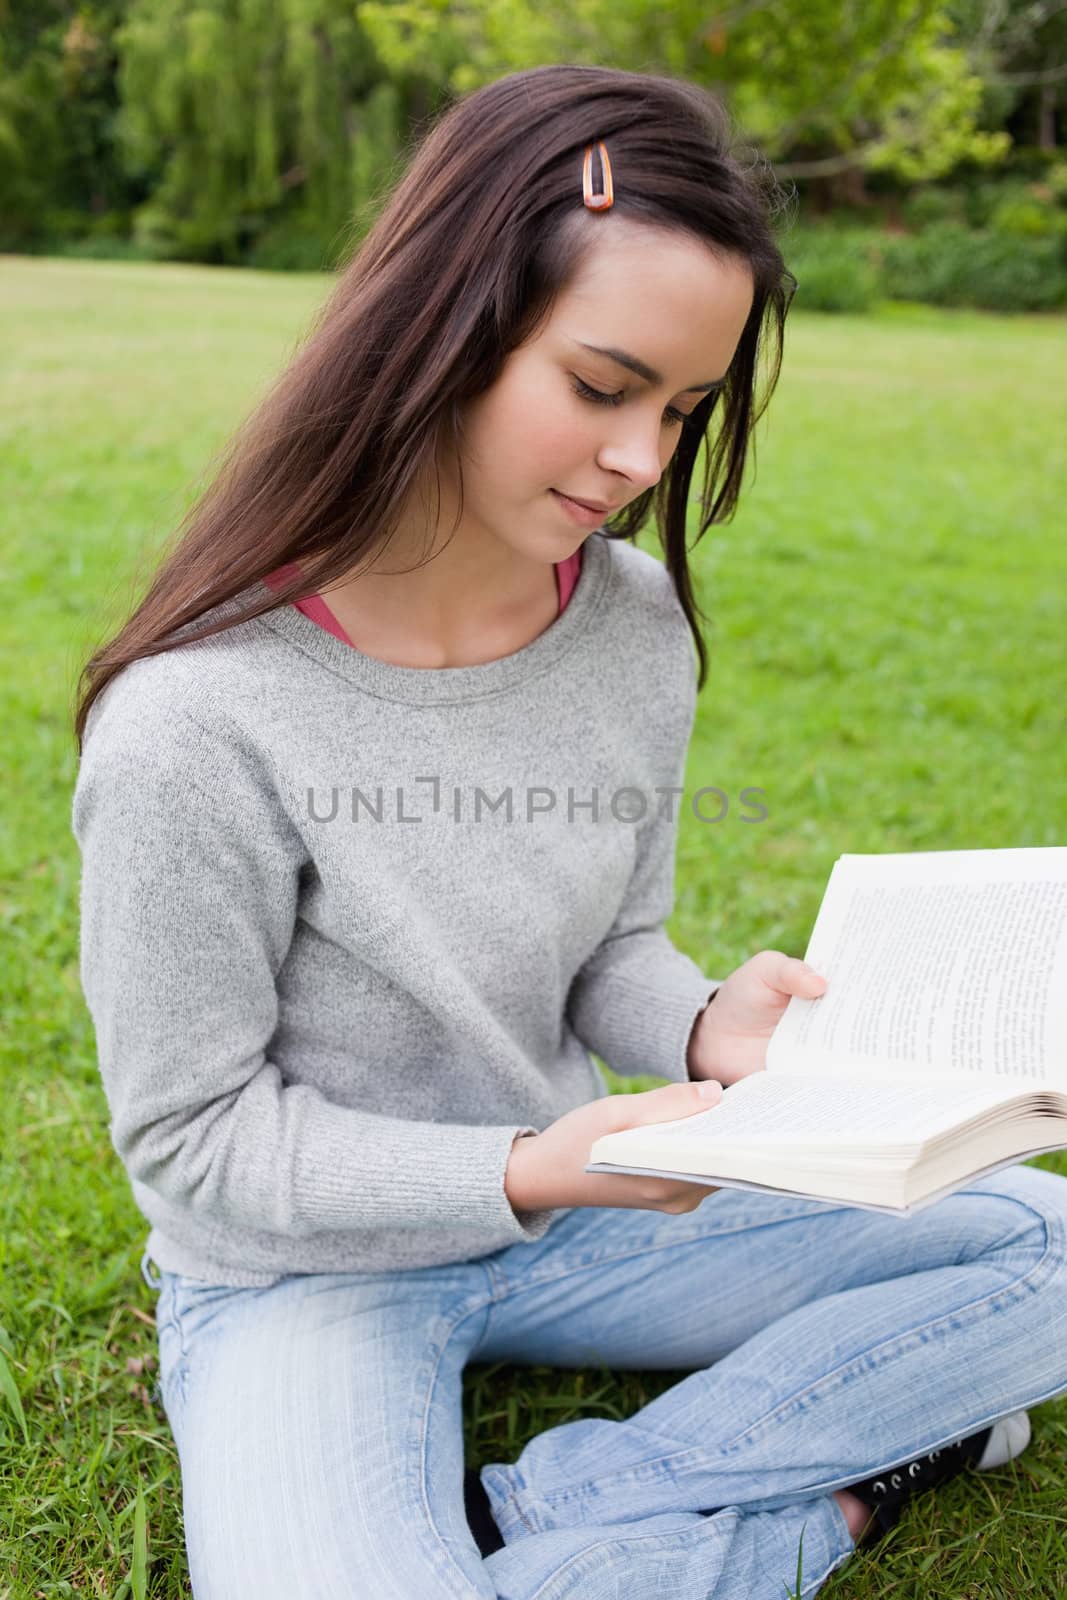 Young calm girl reading a book while sitting down on the grass in a public garden